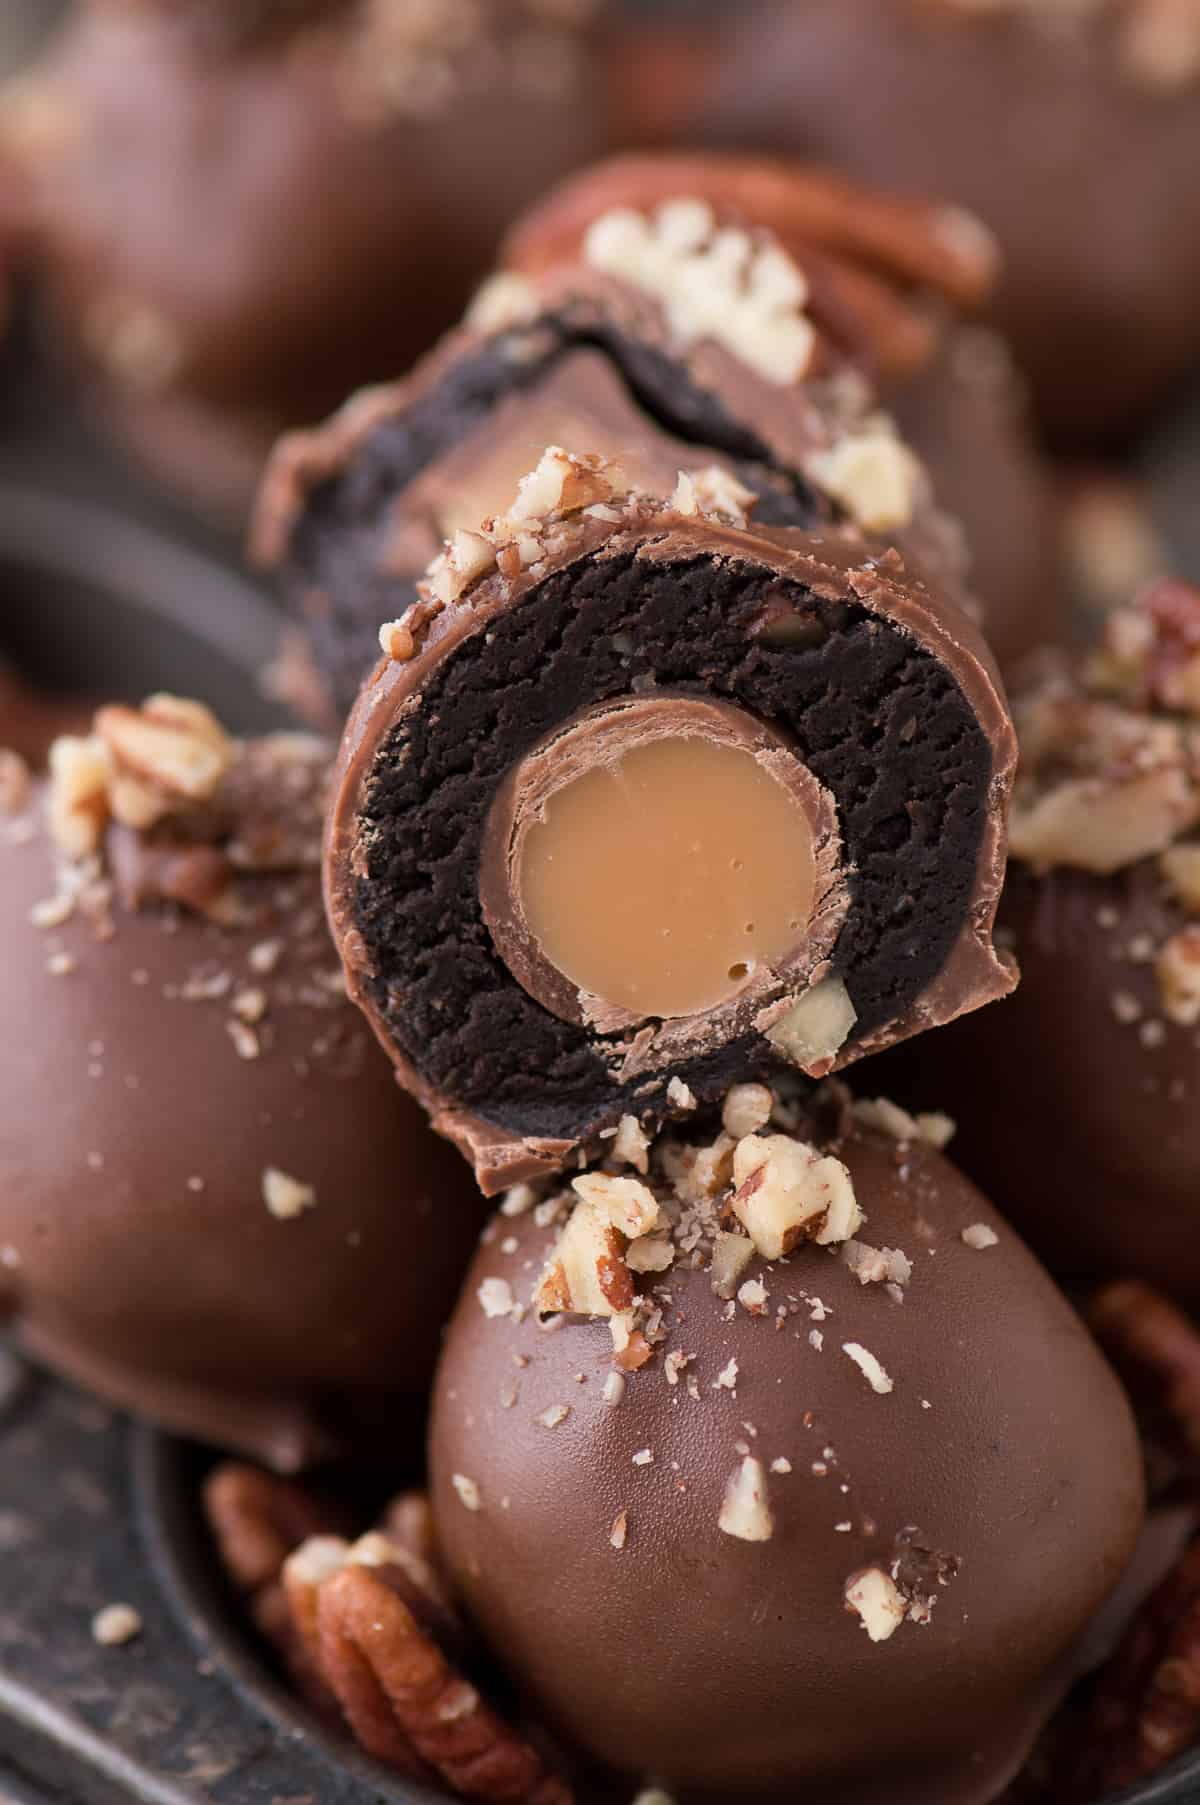 The ultimate turtle oreo ball with chocolate, caramel and nuts! Each oreo ball is stuffed with a ROLO!